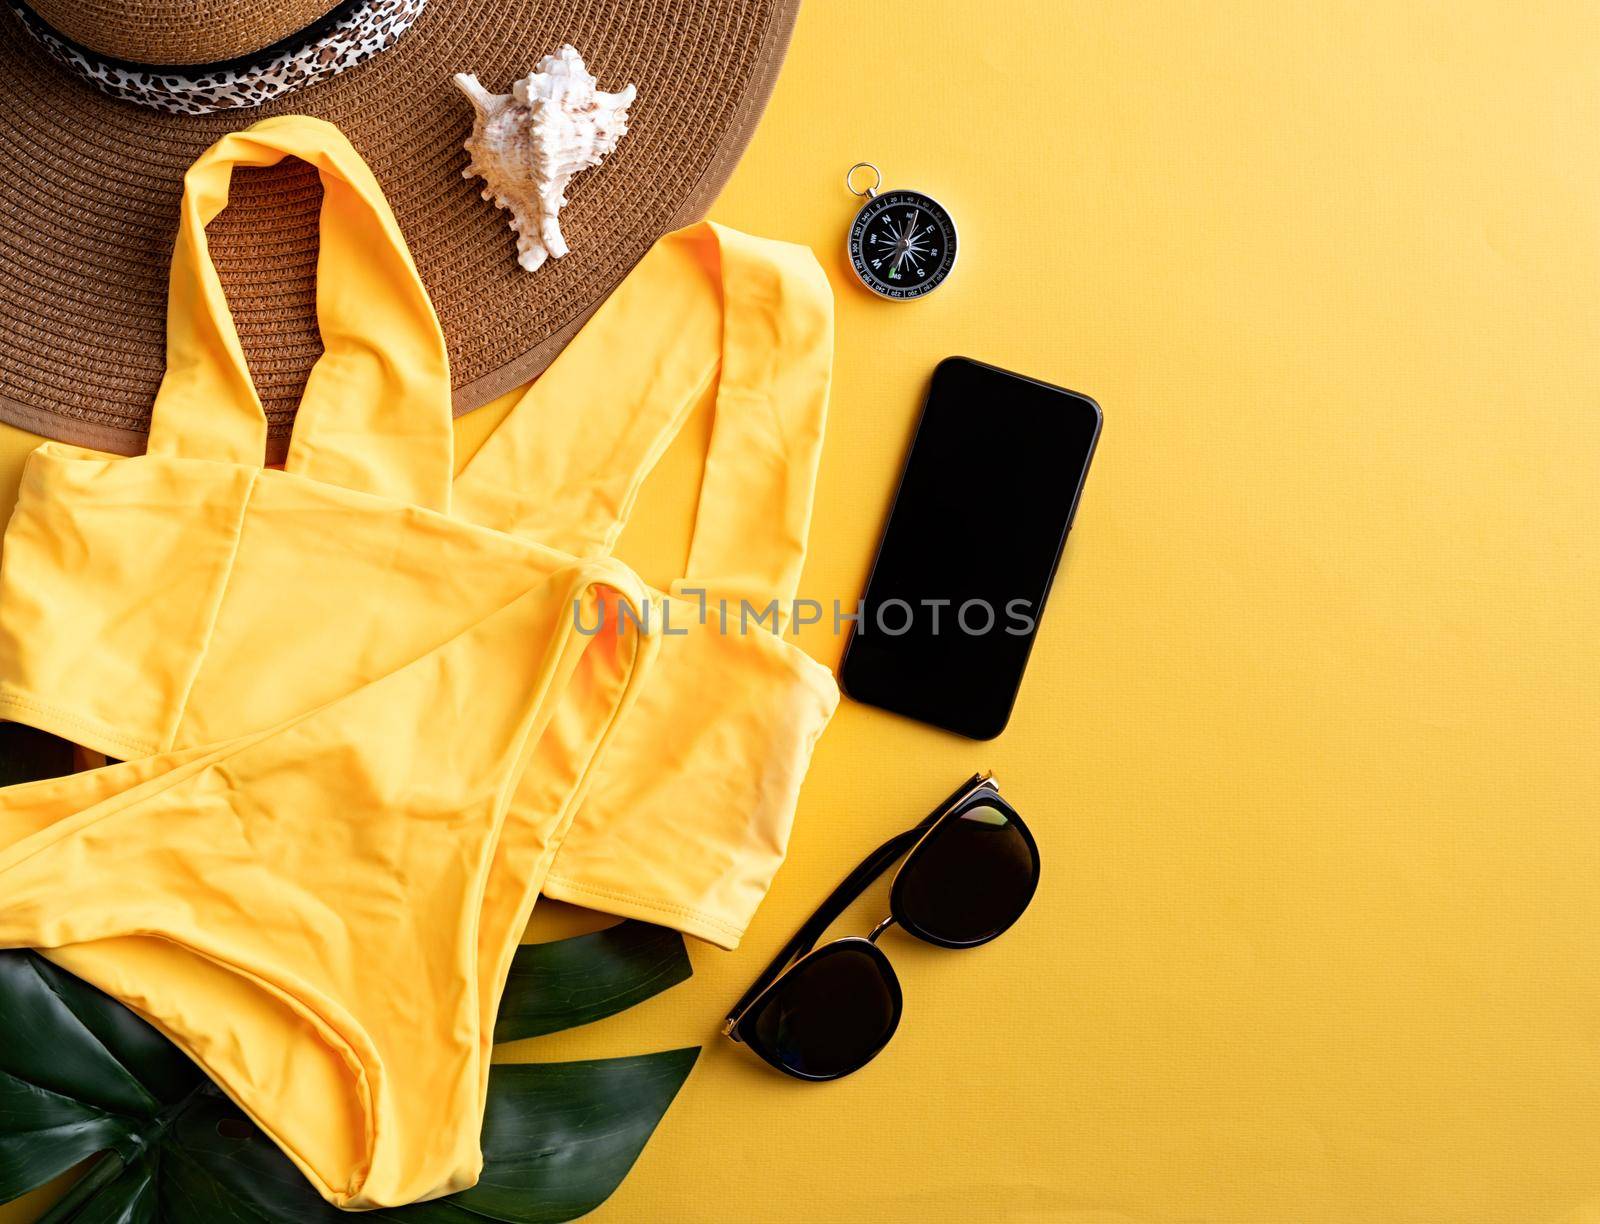 Flat lay travelling gear with swimsuit, smartphone, sunglasses and compass on yellow background by Desperada